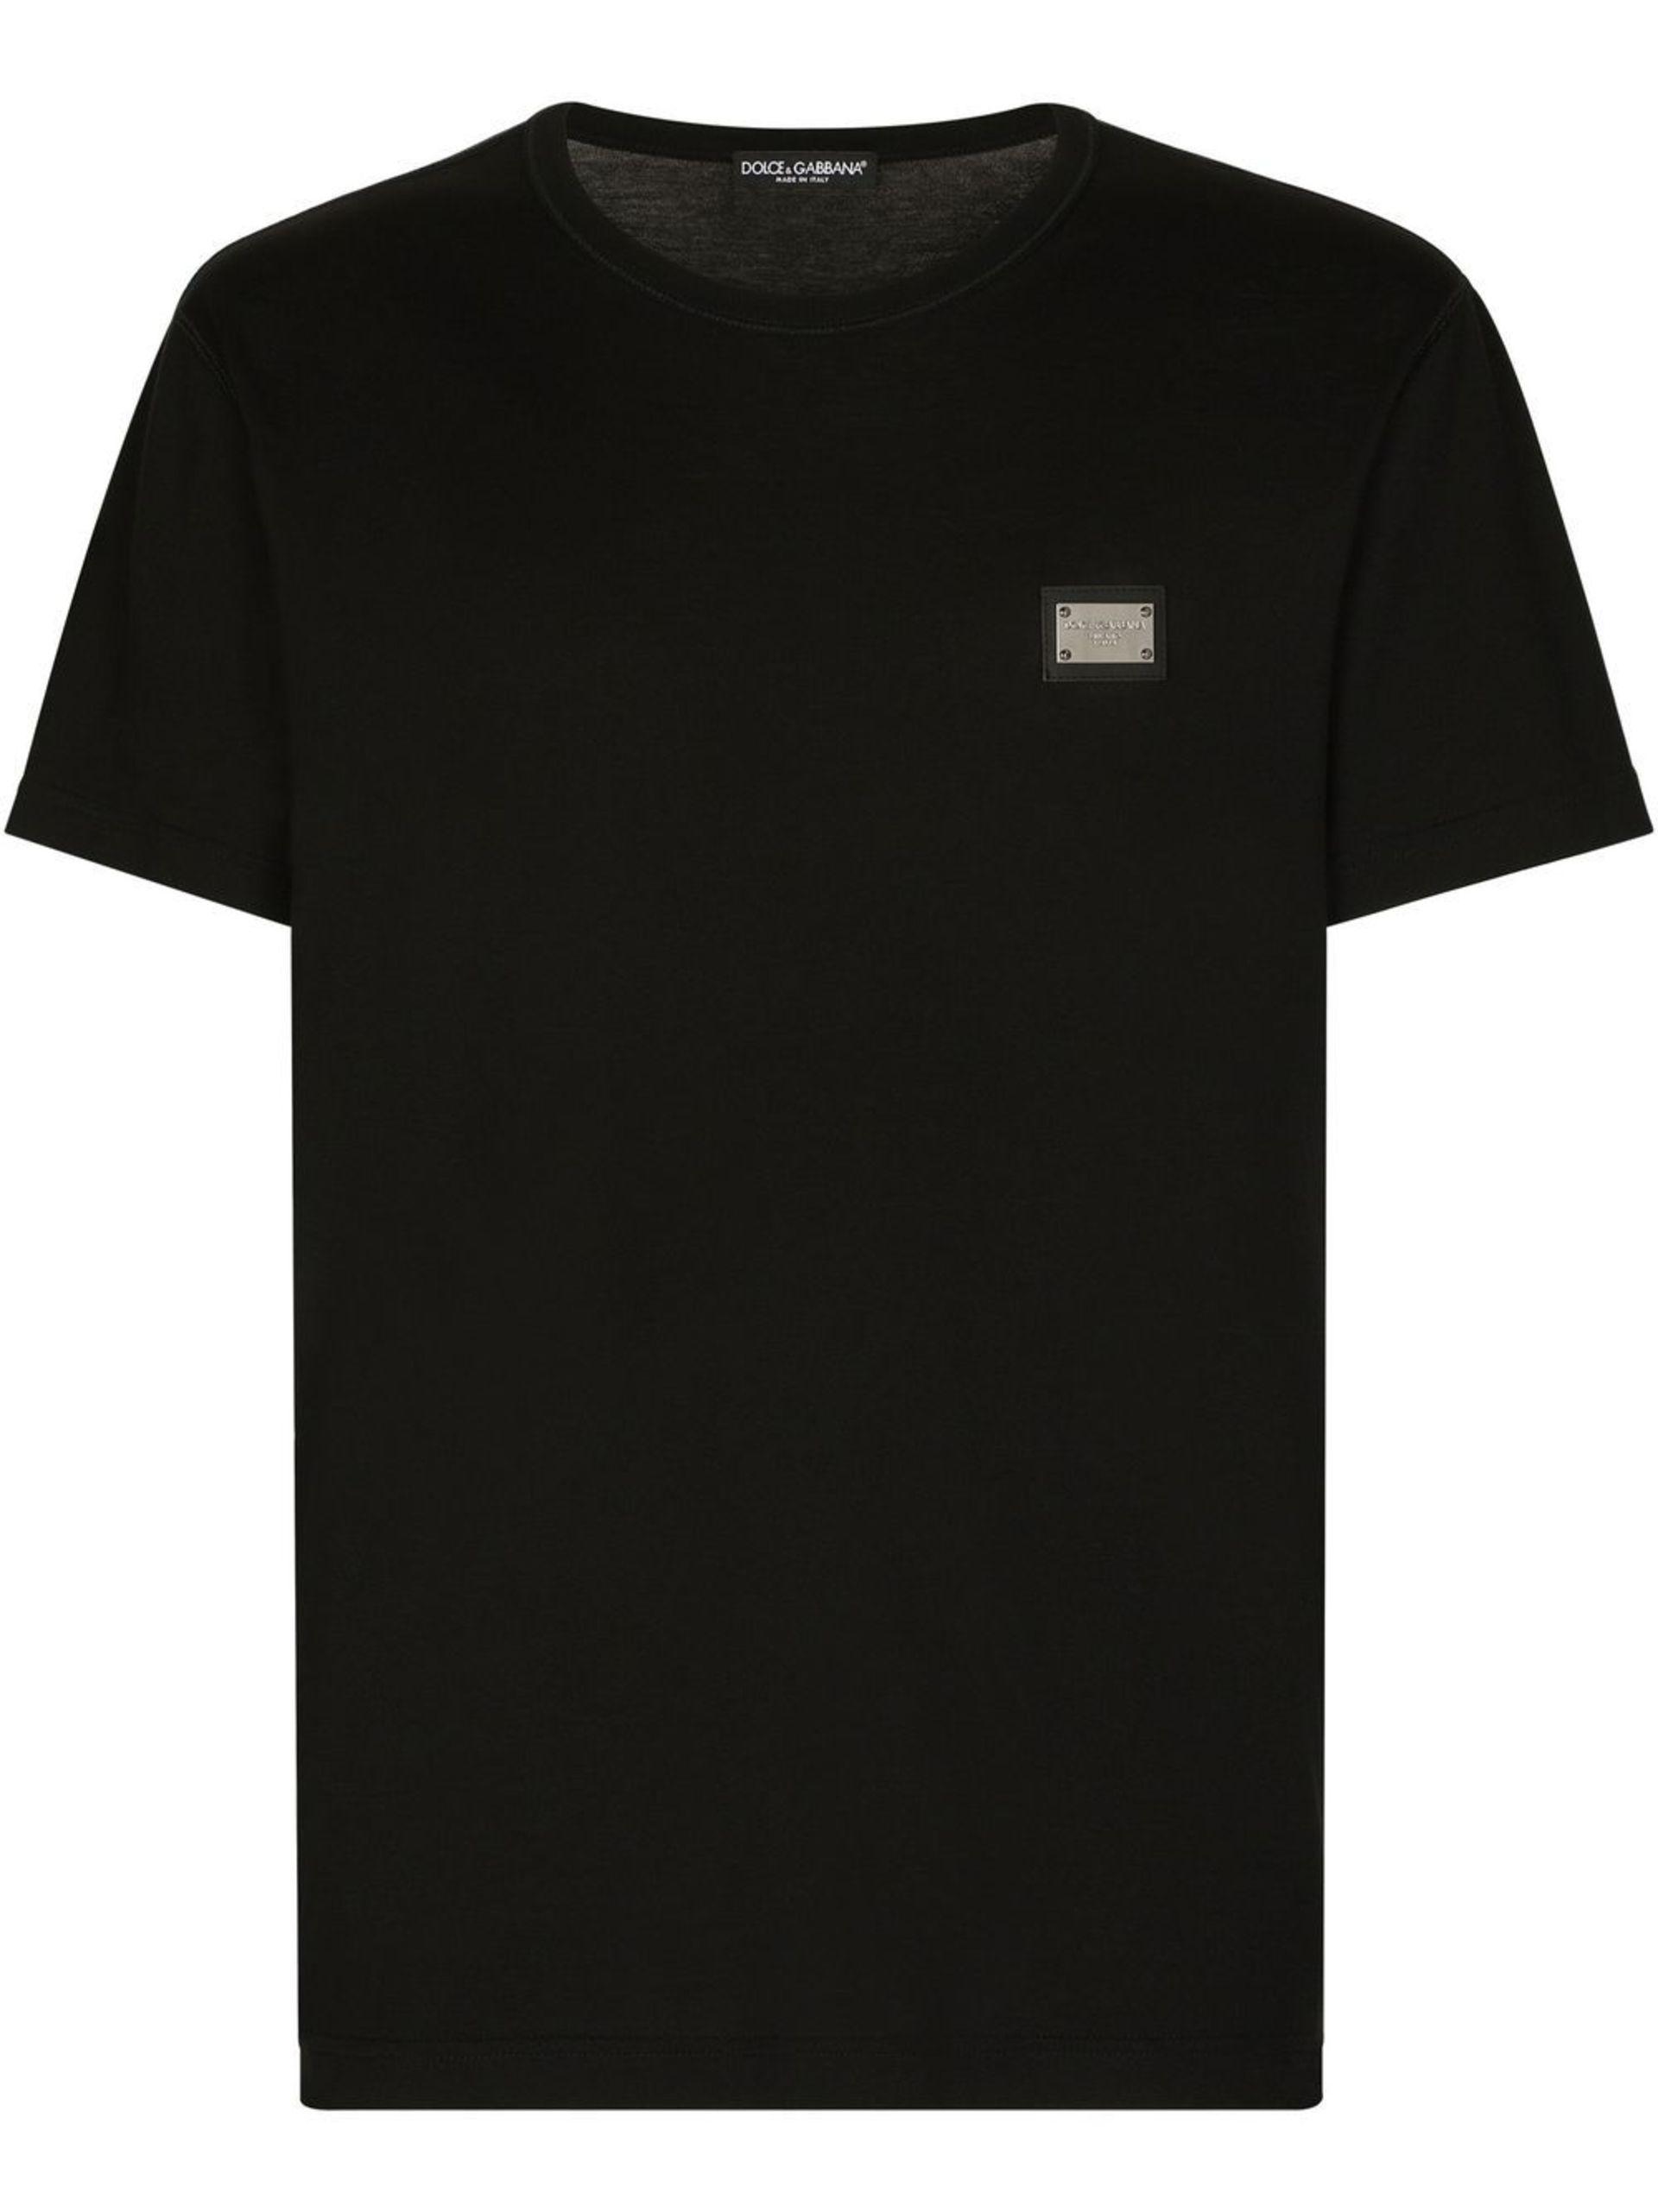 Dolce & Gabbana Cotton T-shirt With Branded Tag in Black for Men | Lyst